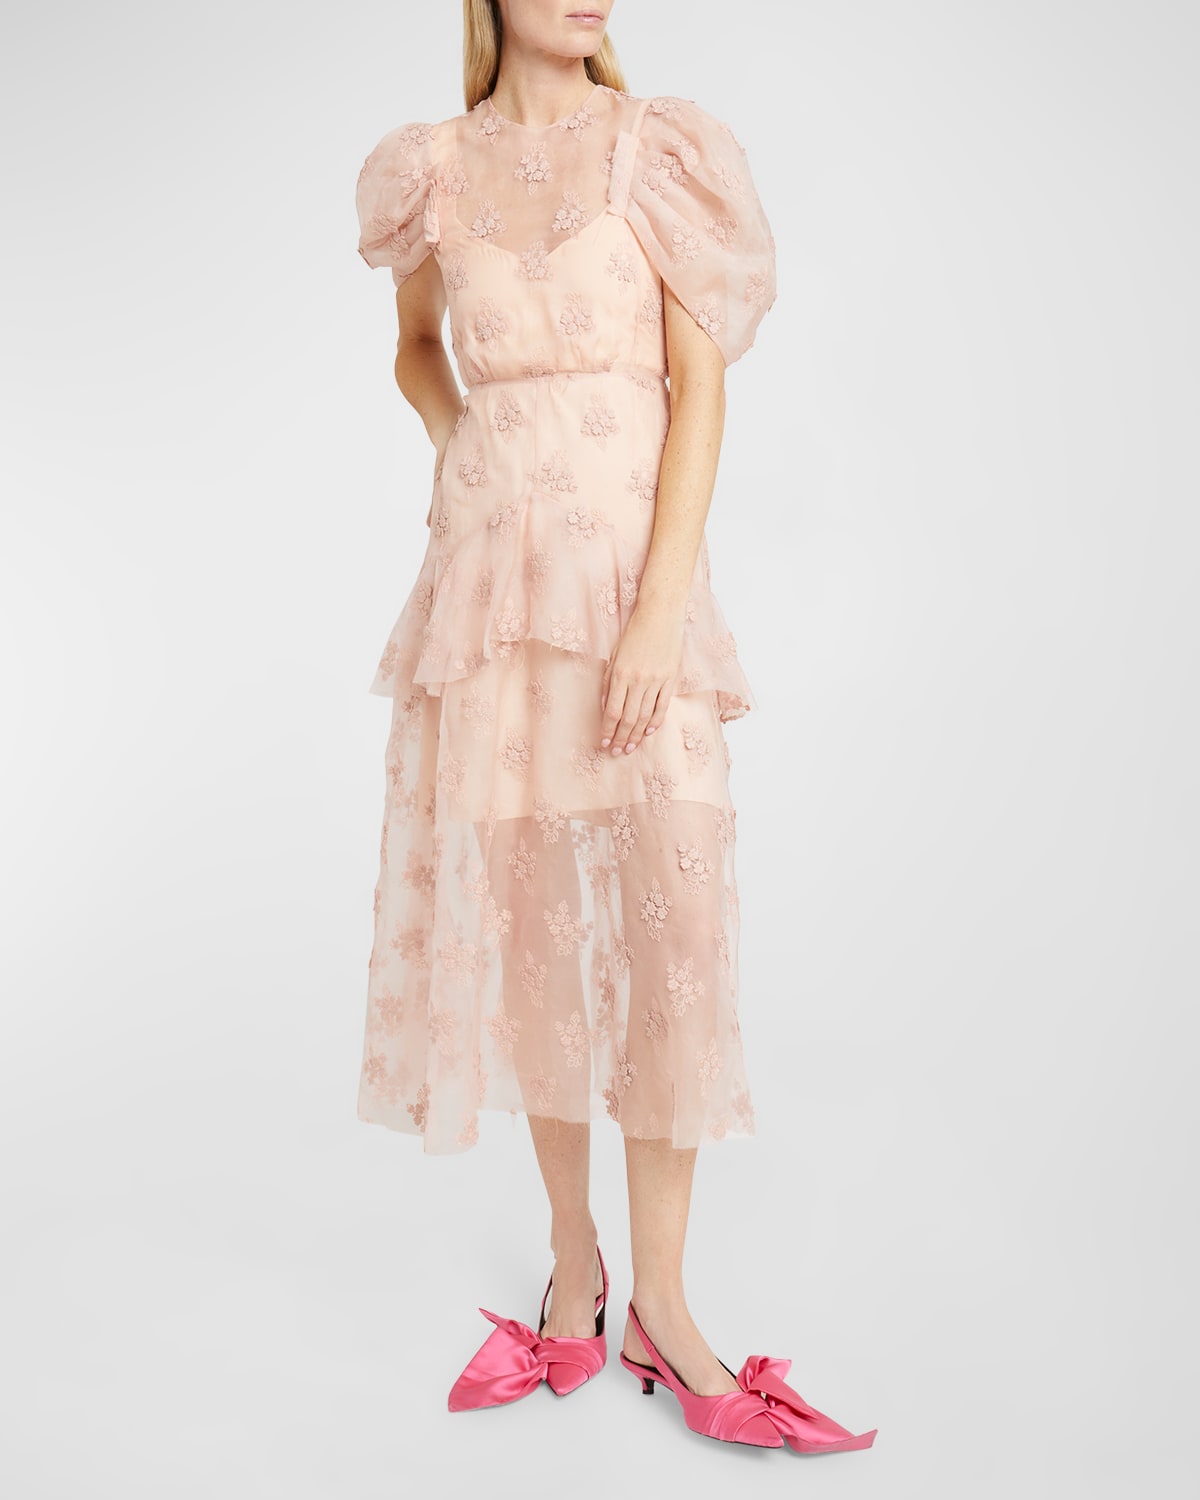 Erdem Sheer Peplum Midi Dress With Floral Embroidery In Ballet Pink